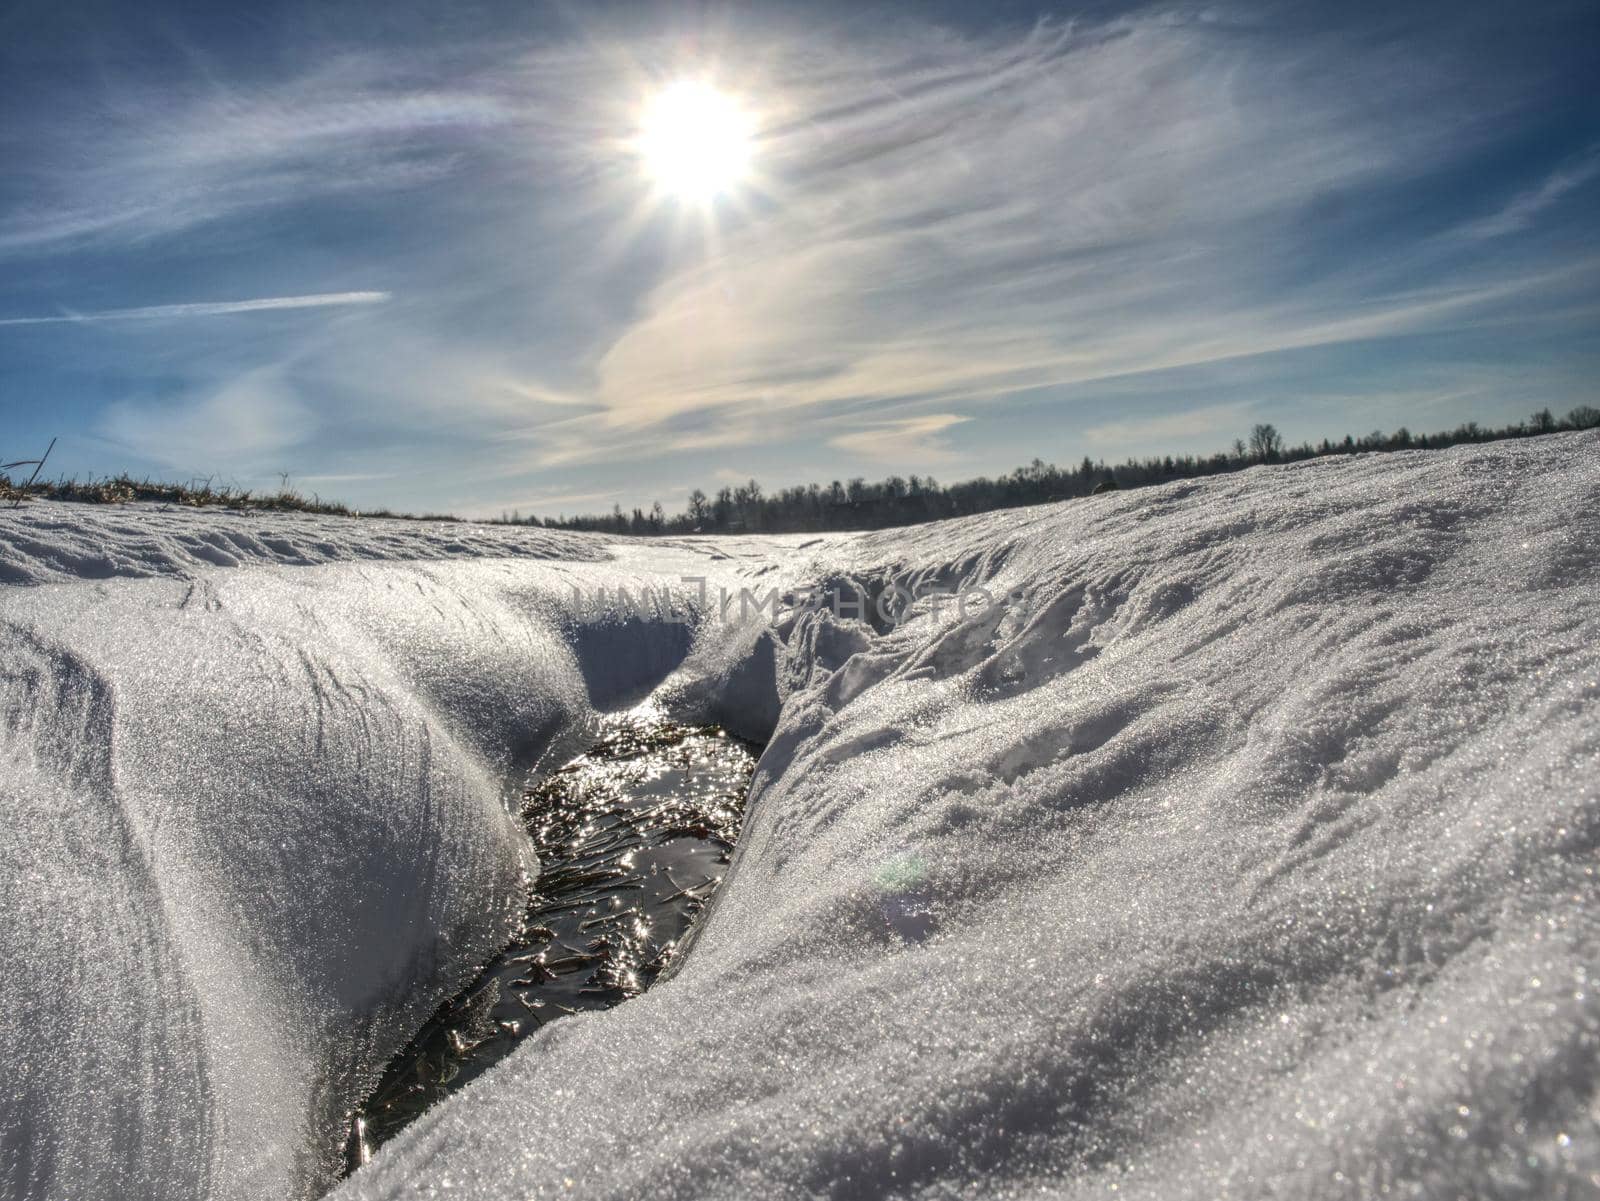 Hole in icy snow with sun flares. Lovely winter scene.